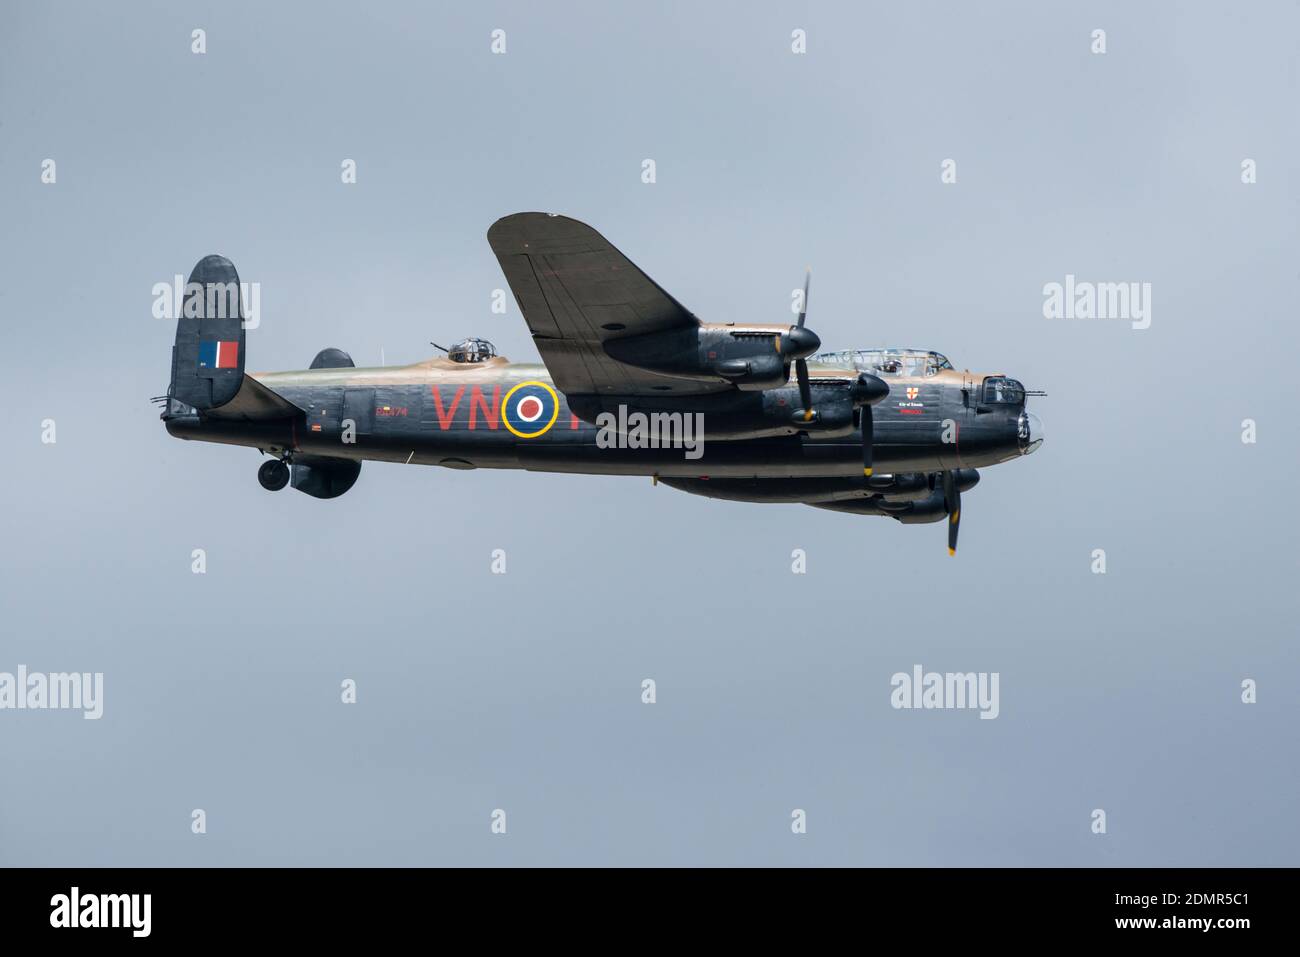 An Avro Lancaster bomber at the RIAT air-show in England Stock Photo